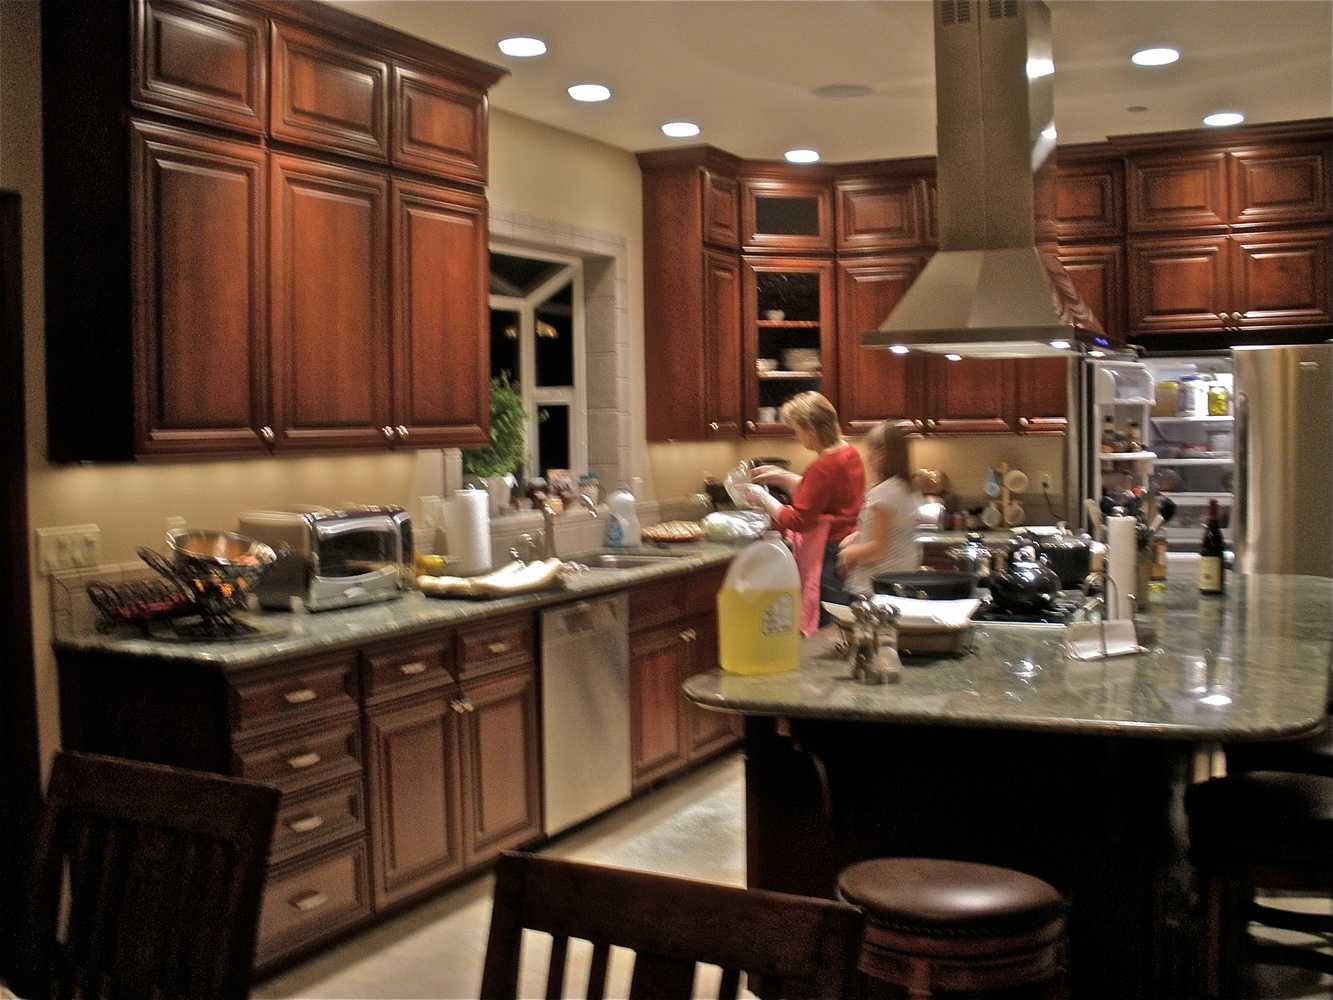 Kitchens - A Dependable Contractor 